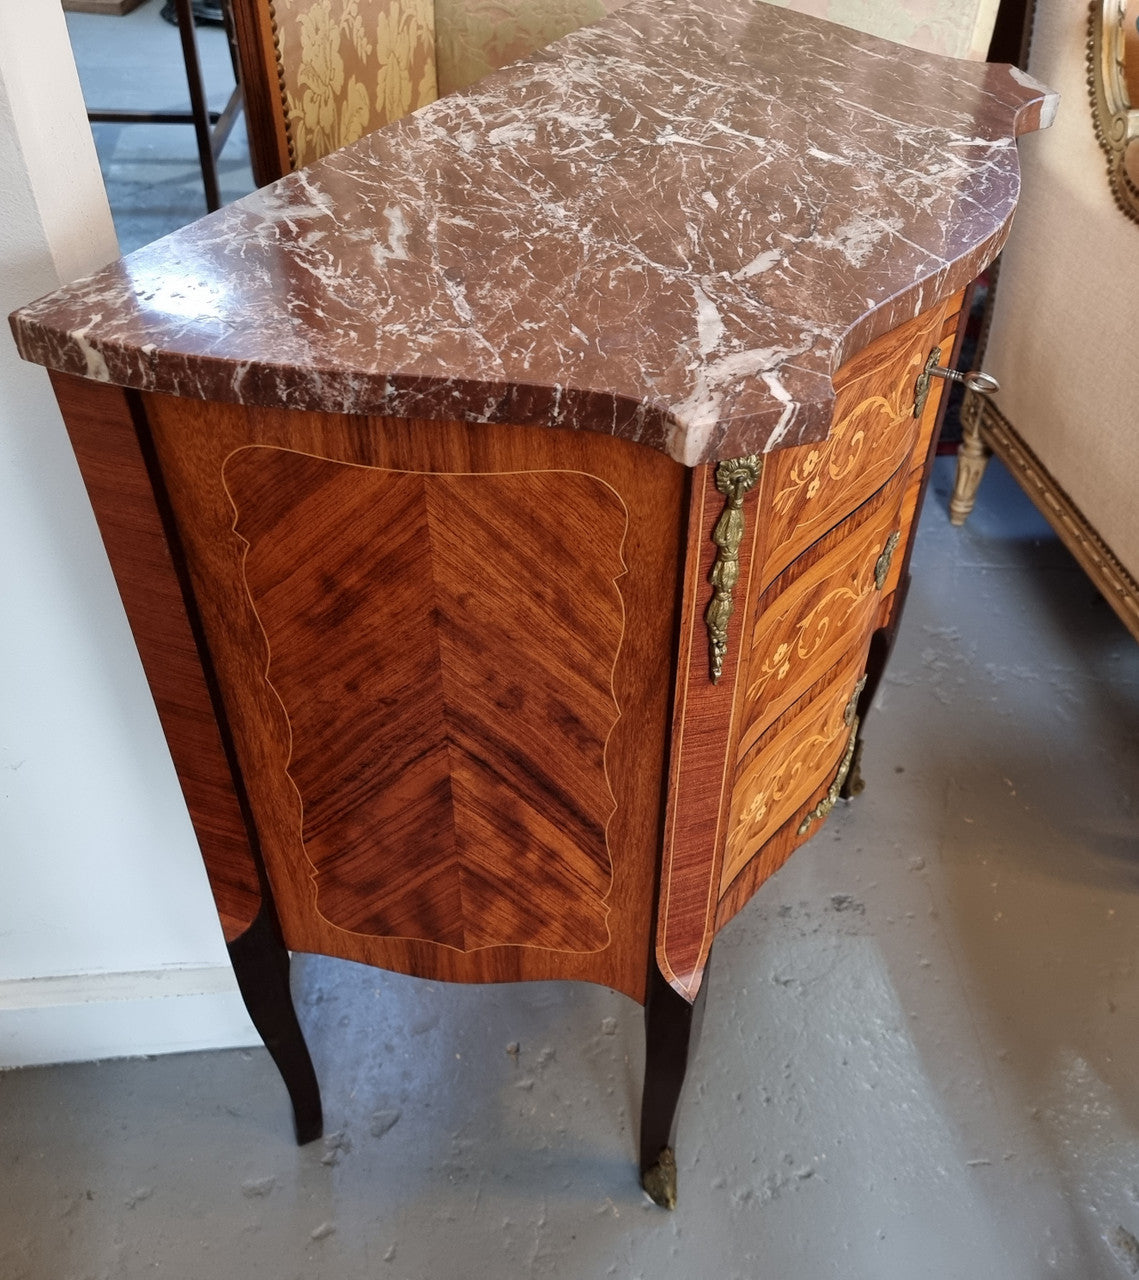 Lovely french 3 drawer Rosewood and Kingwood ,marquetry inlaid commode. There are 3 drawers and a lovely marble top with ormolu mounts in good original detailed condition.